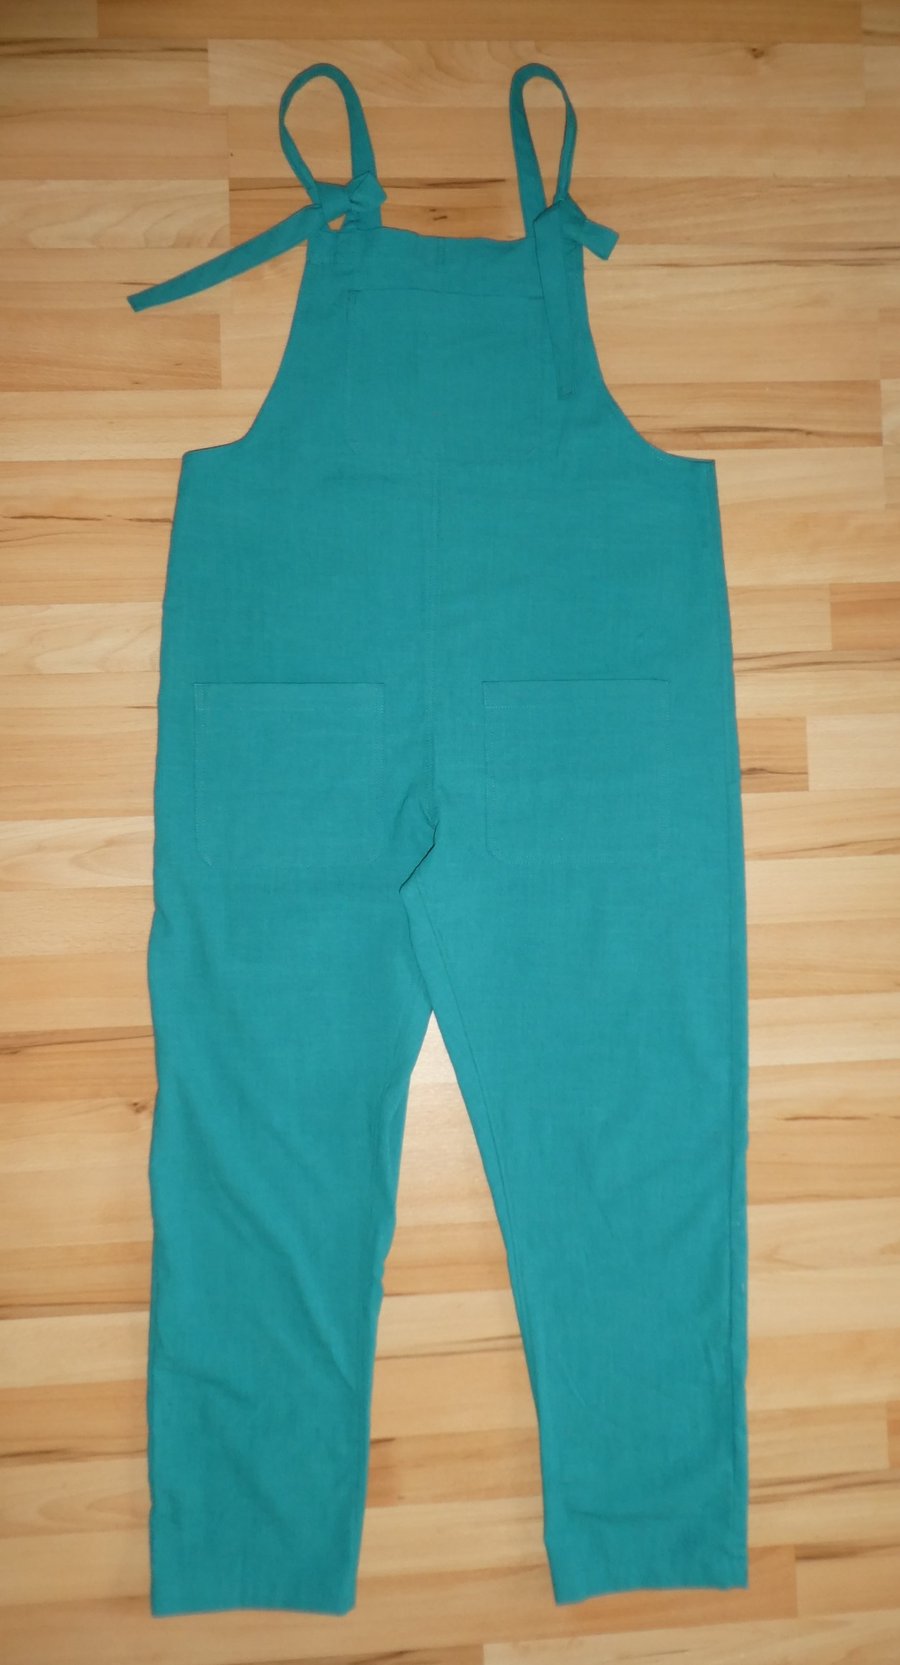 Linen Dungarees in Teal Green. Womens Dungarees Size Medium. Dungarees